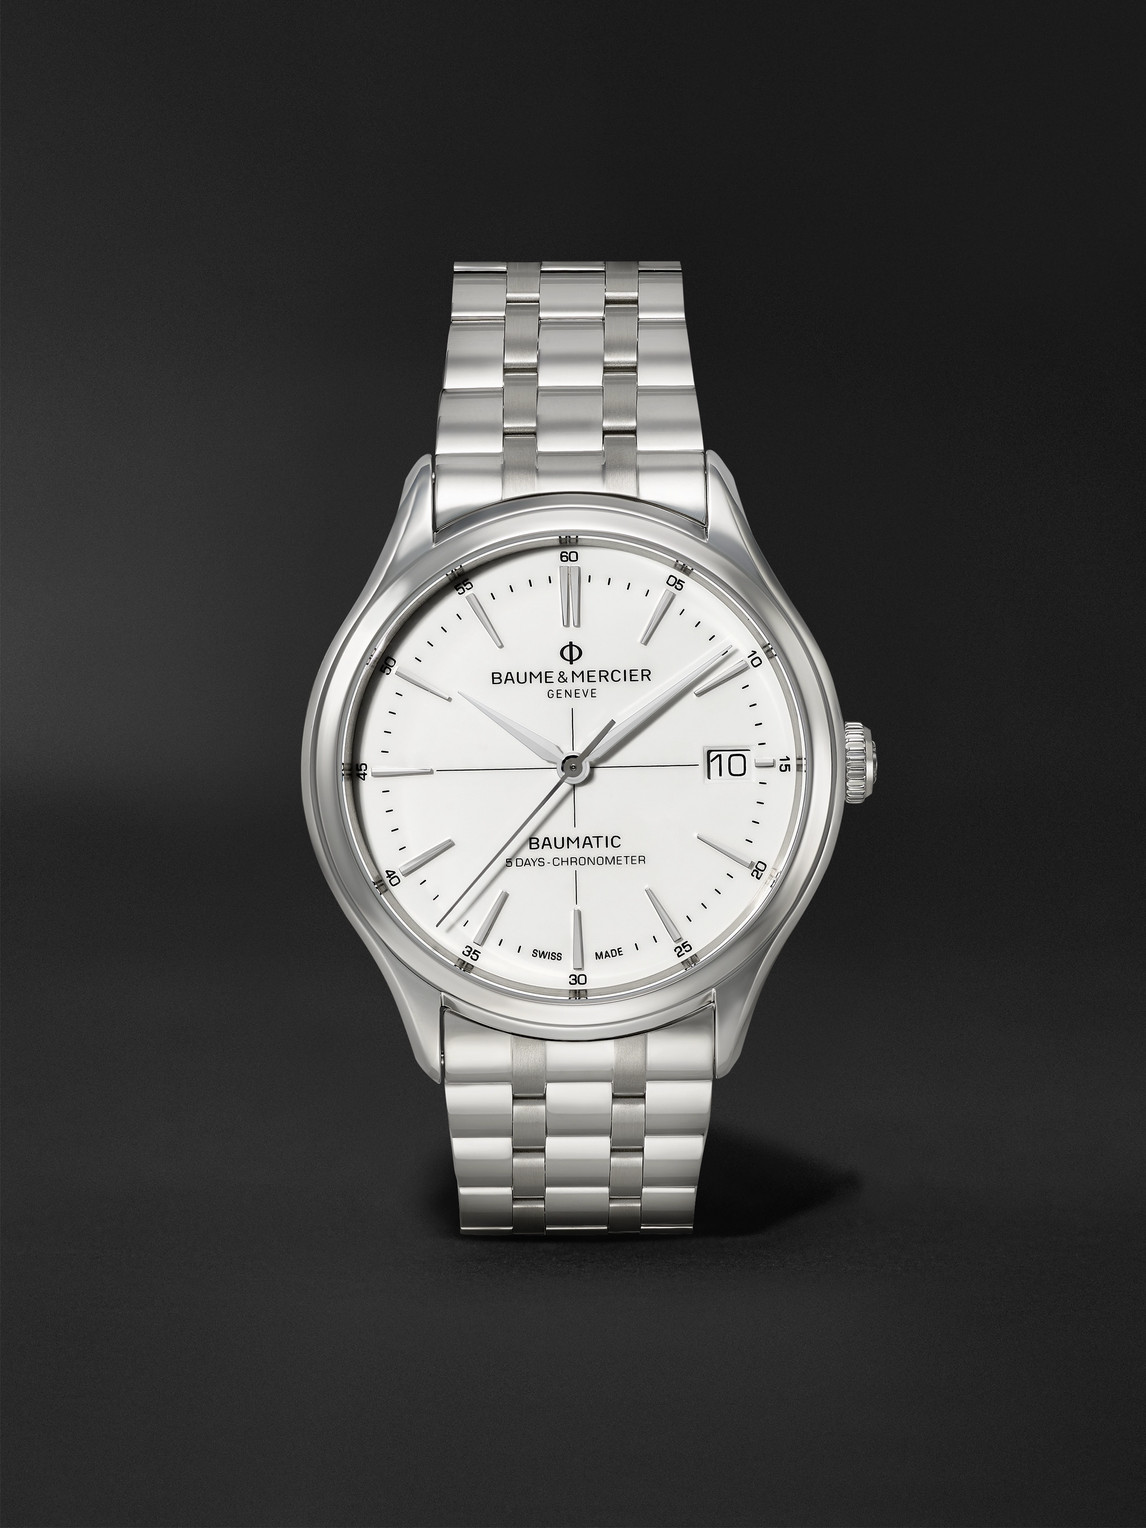 Baume & Mercier Clifton Baumatic Automatic Chronometer 40mm Stainless Steel Watch, Ref. No. M0a10505 In White